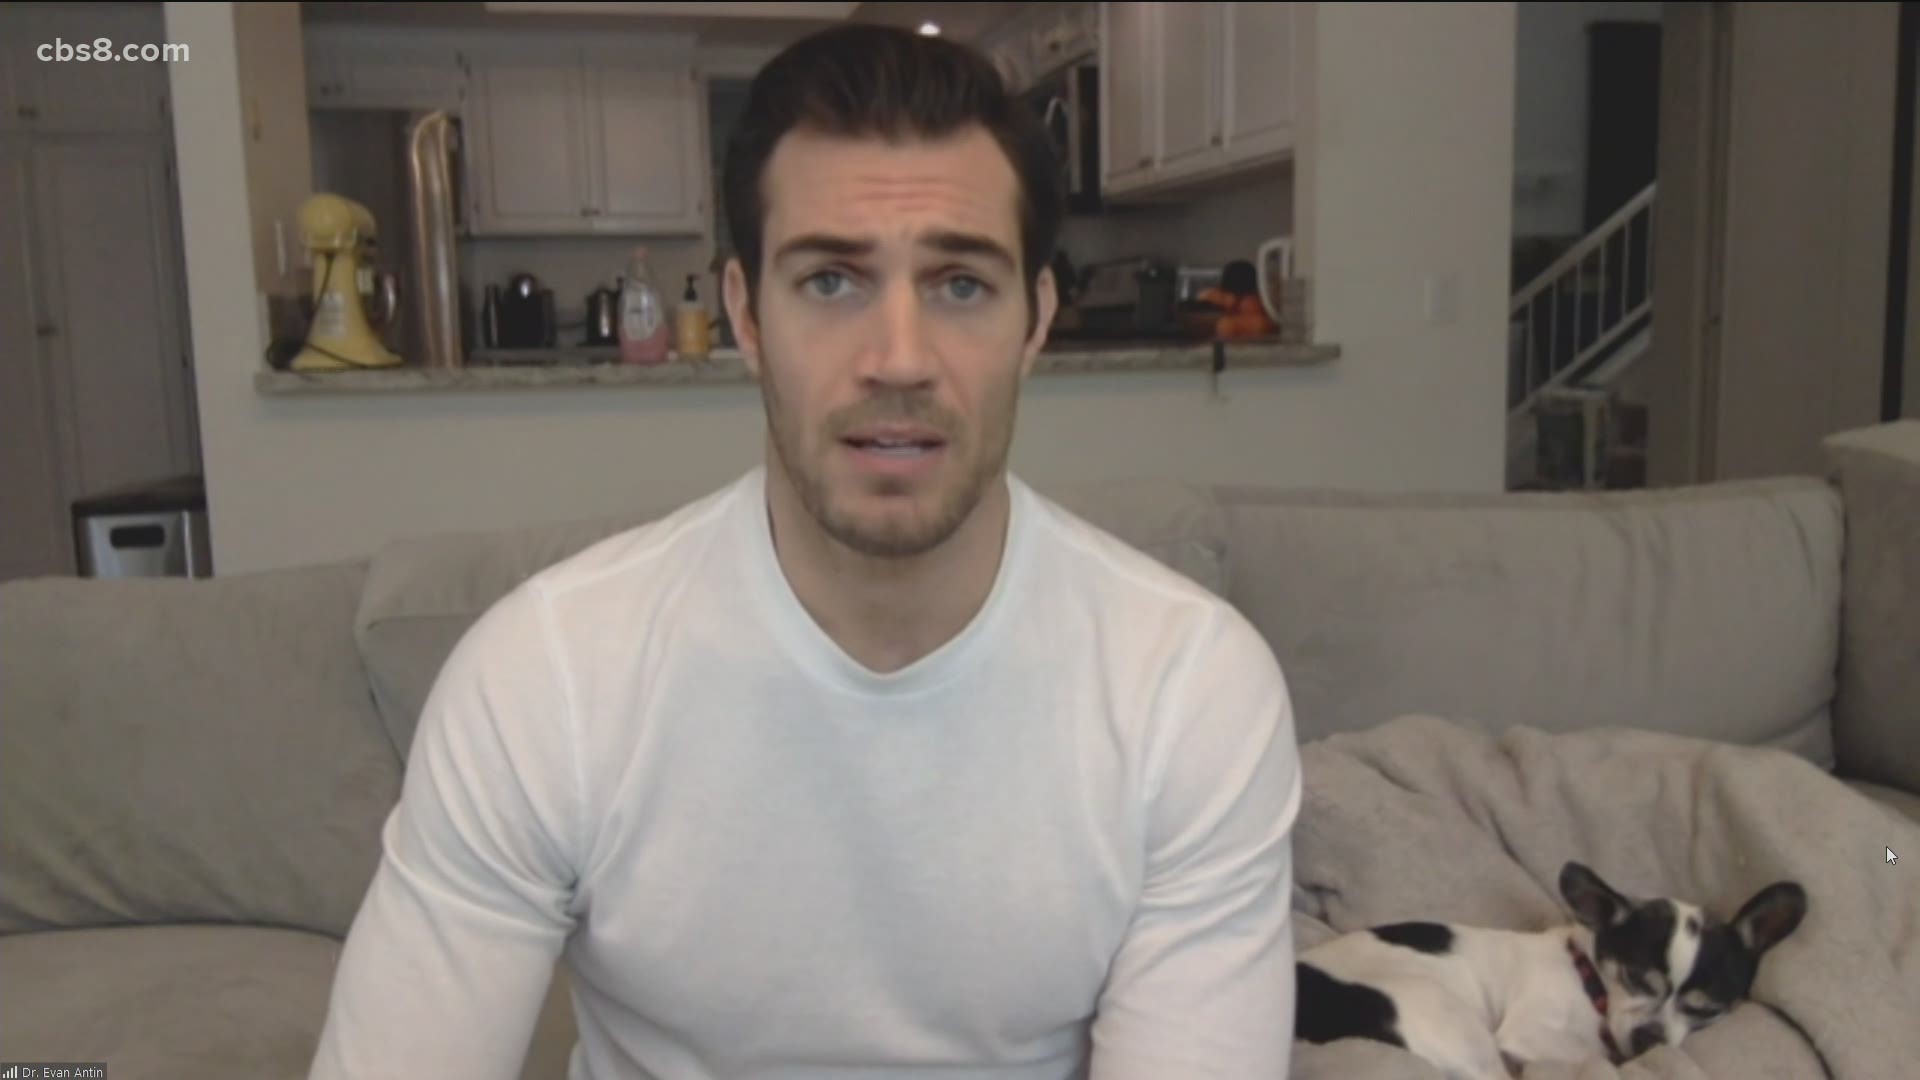 Dr. Evan Antin, America's 'sexiest veterinarian' joined Morning Extra Thursday to talk about his memoir 'World Wild Vet.'